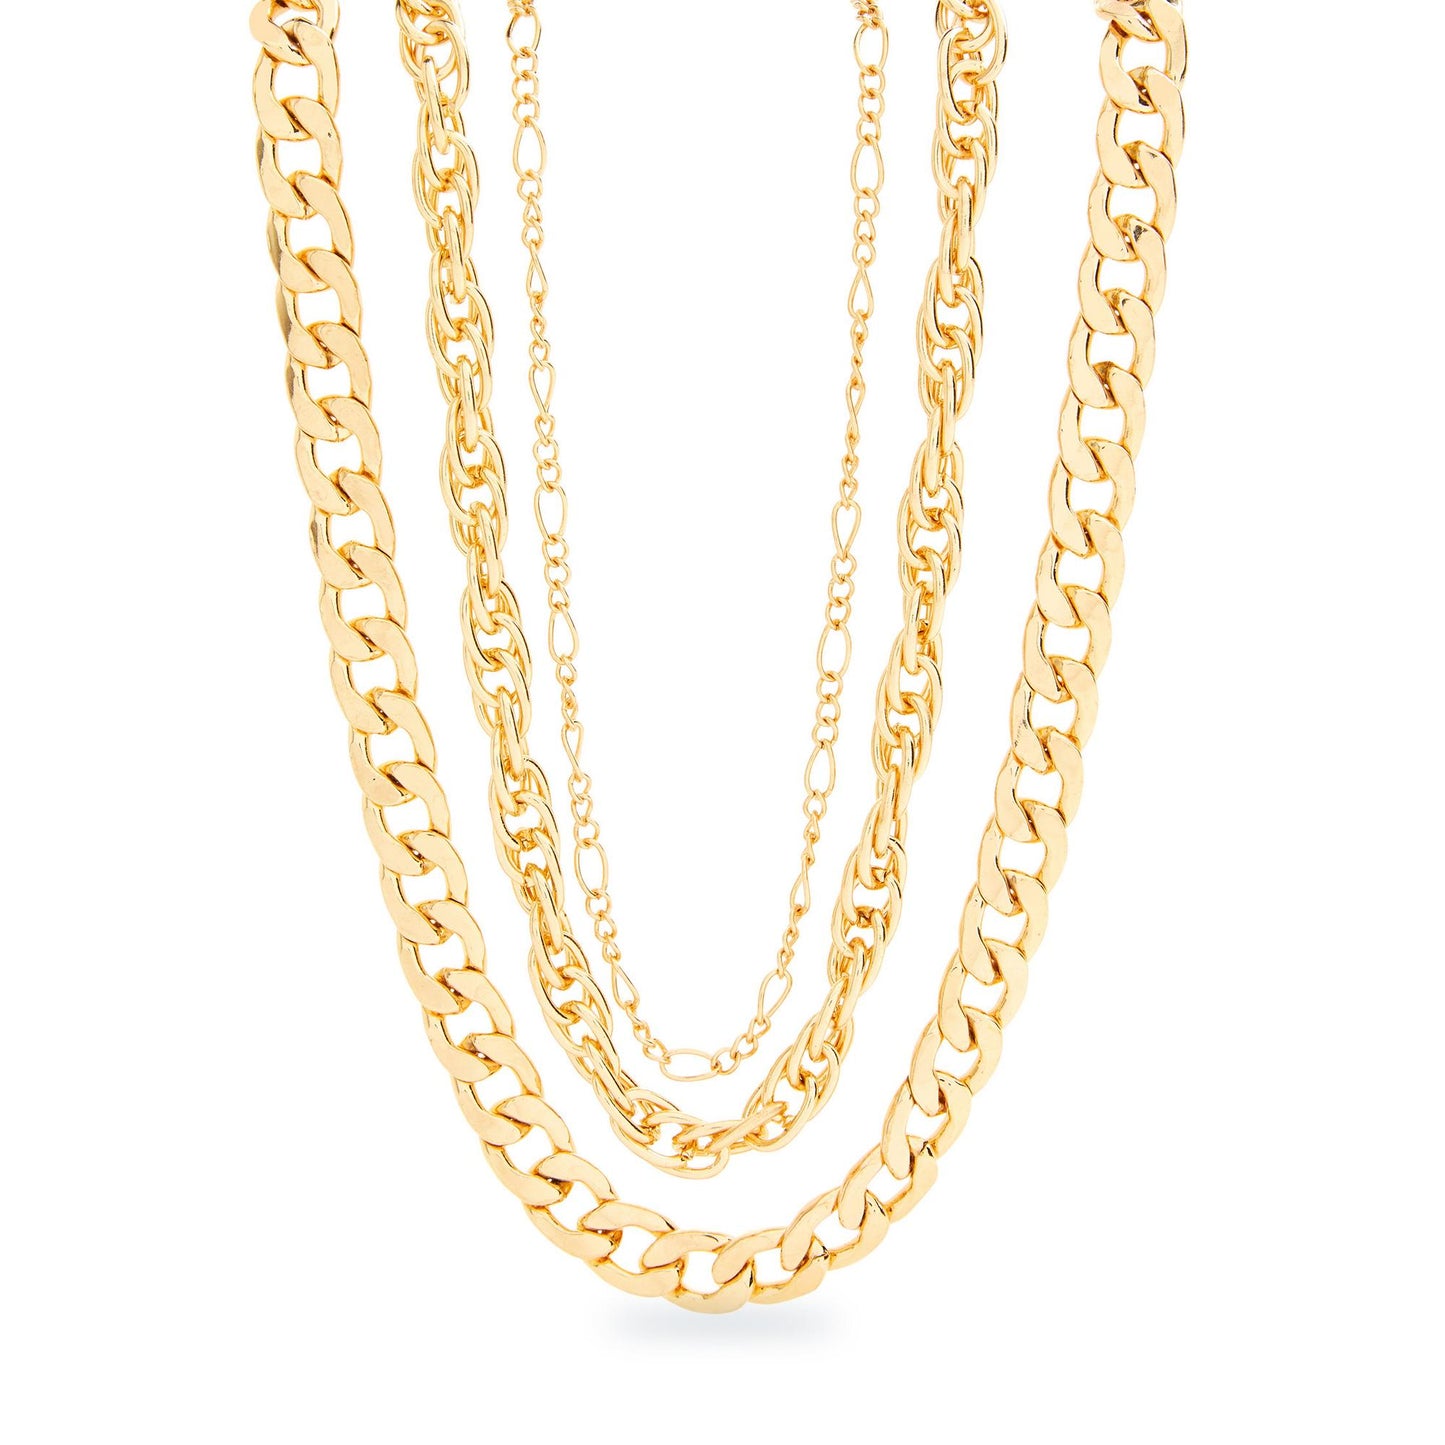 Gold 3 Row Chunky Chain Necklace